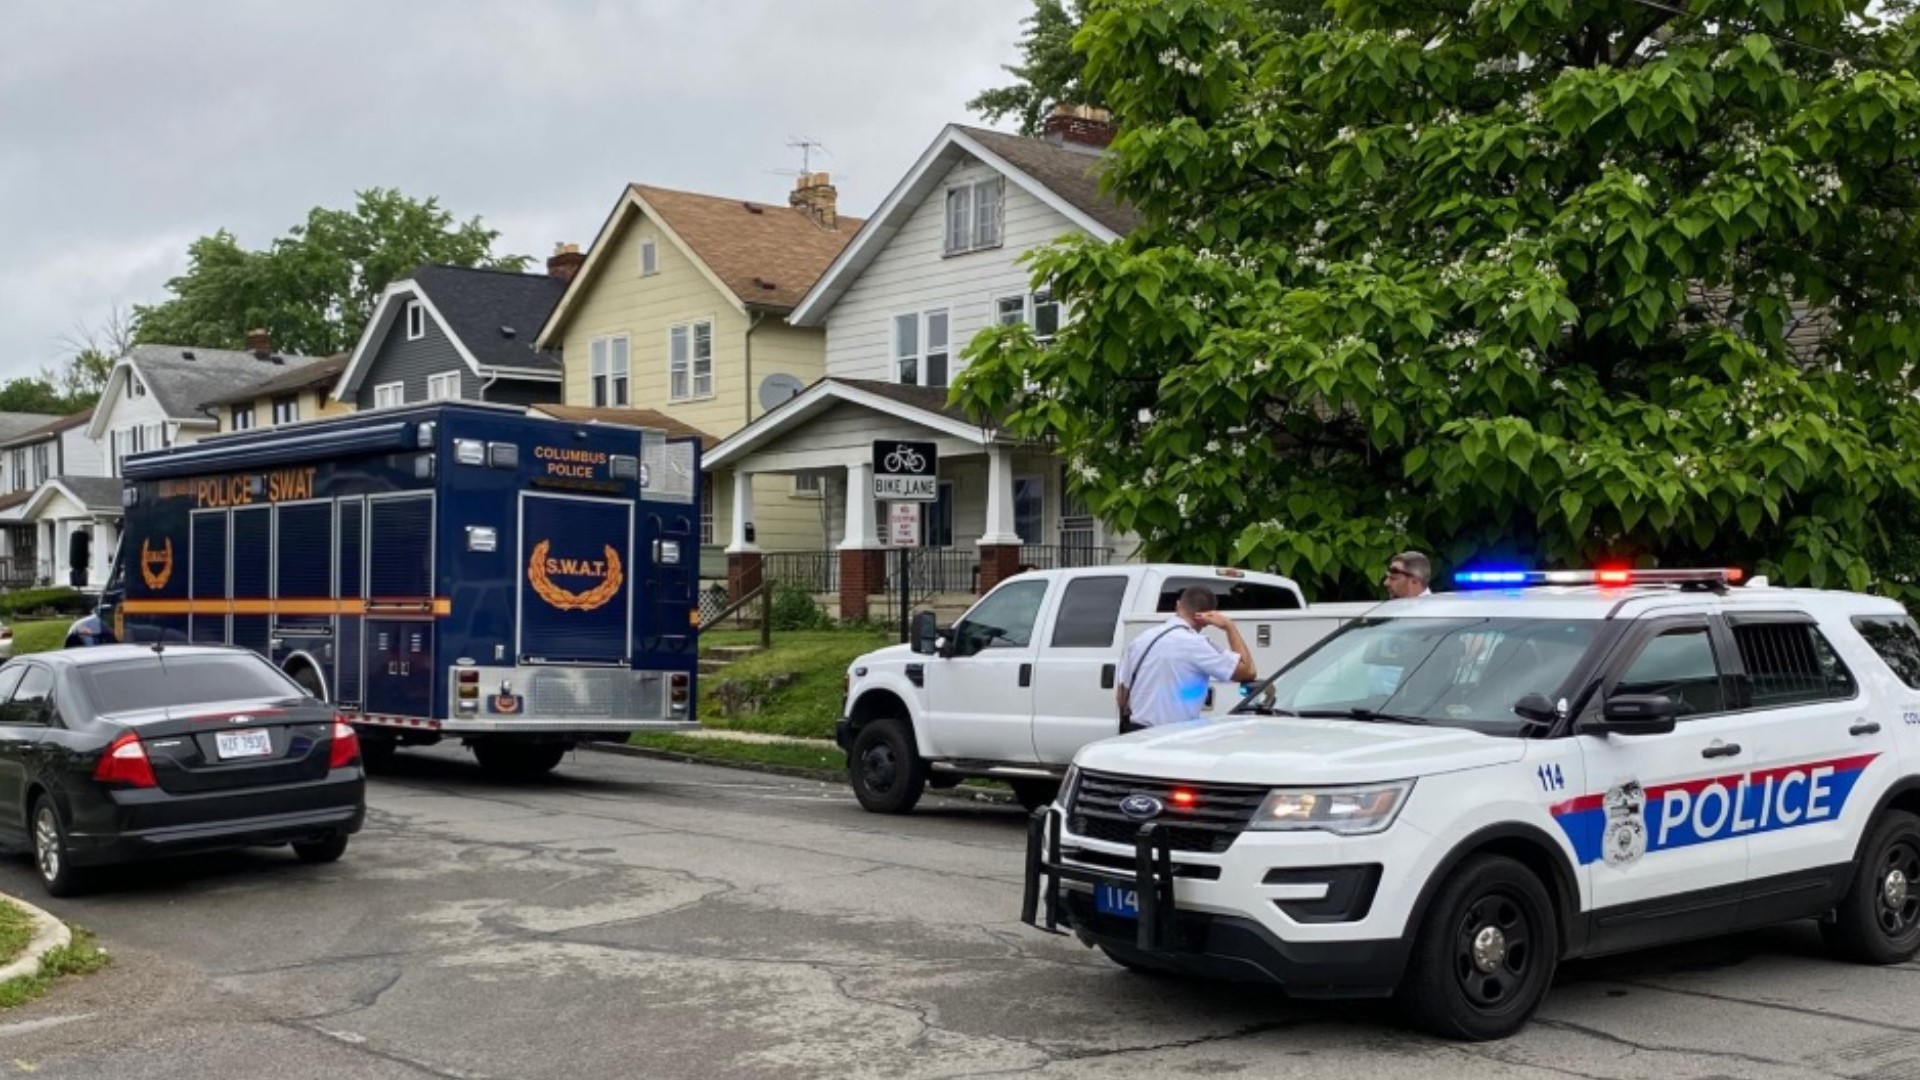 The investigation into a fatal shooting in the Hilltop earlier this year is now focused on a residence in south Columbus.